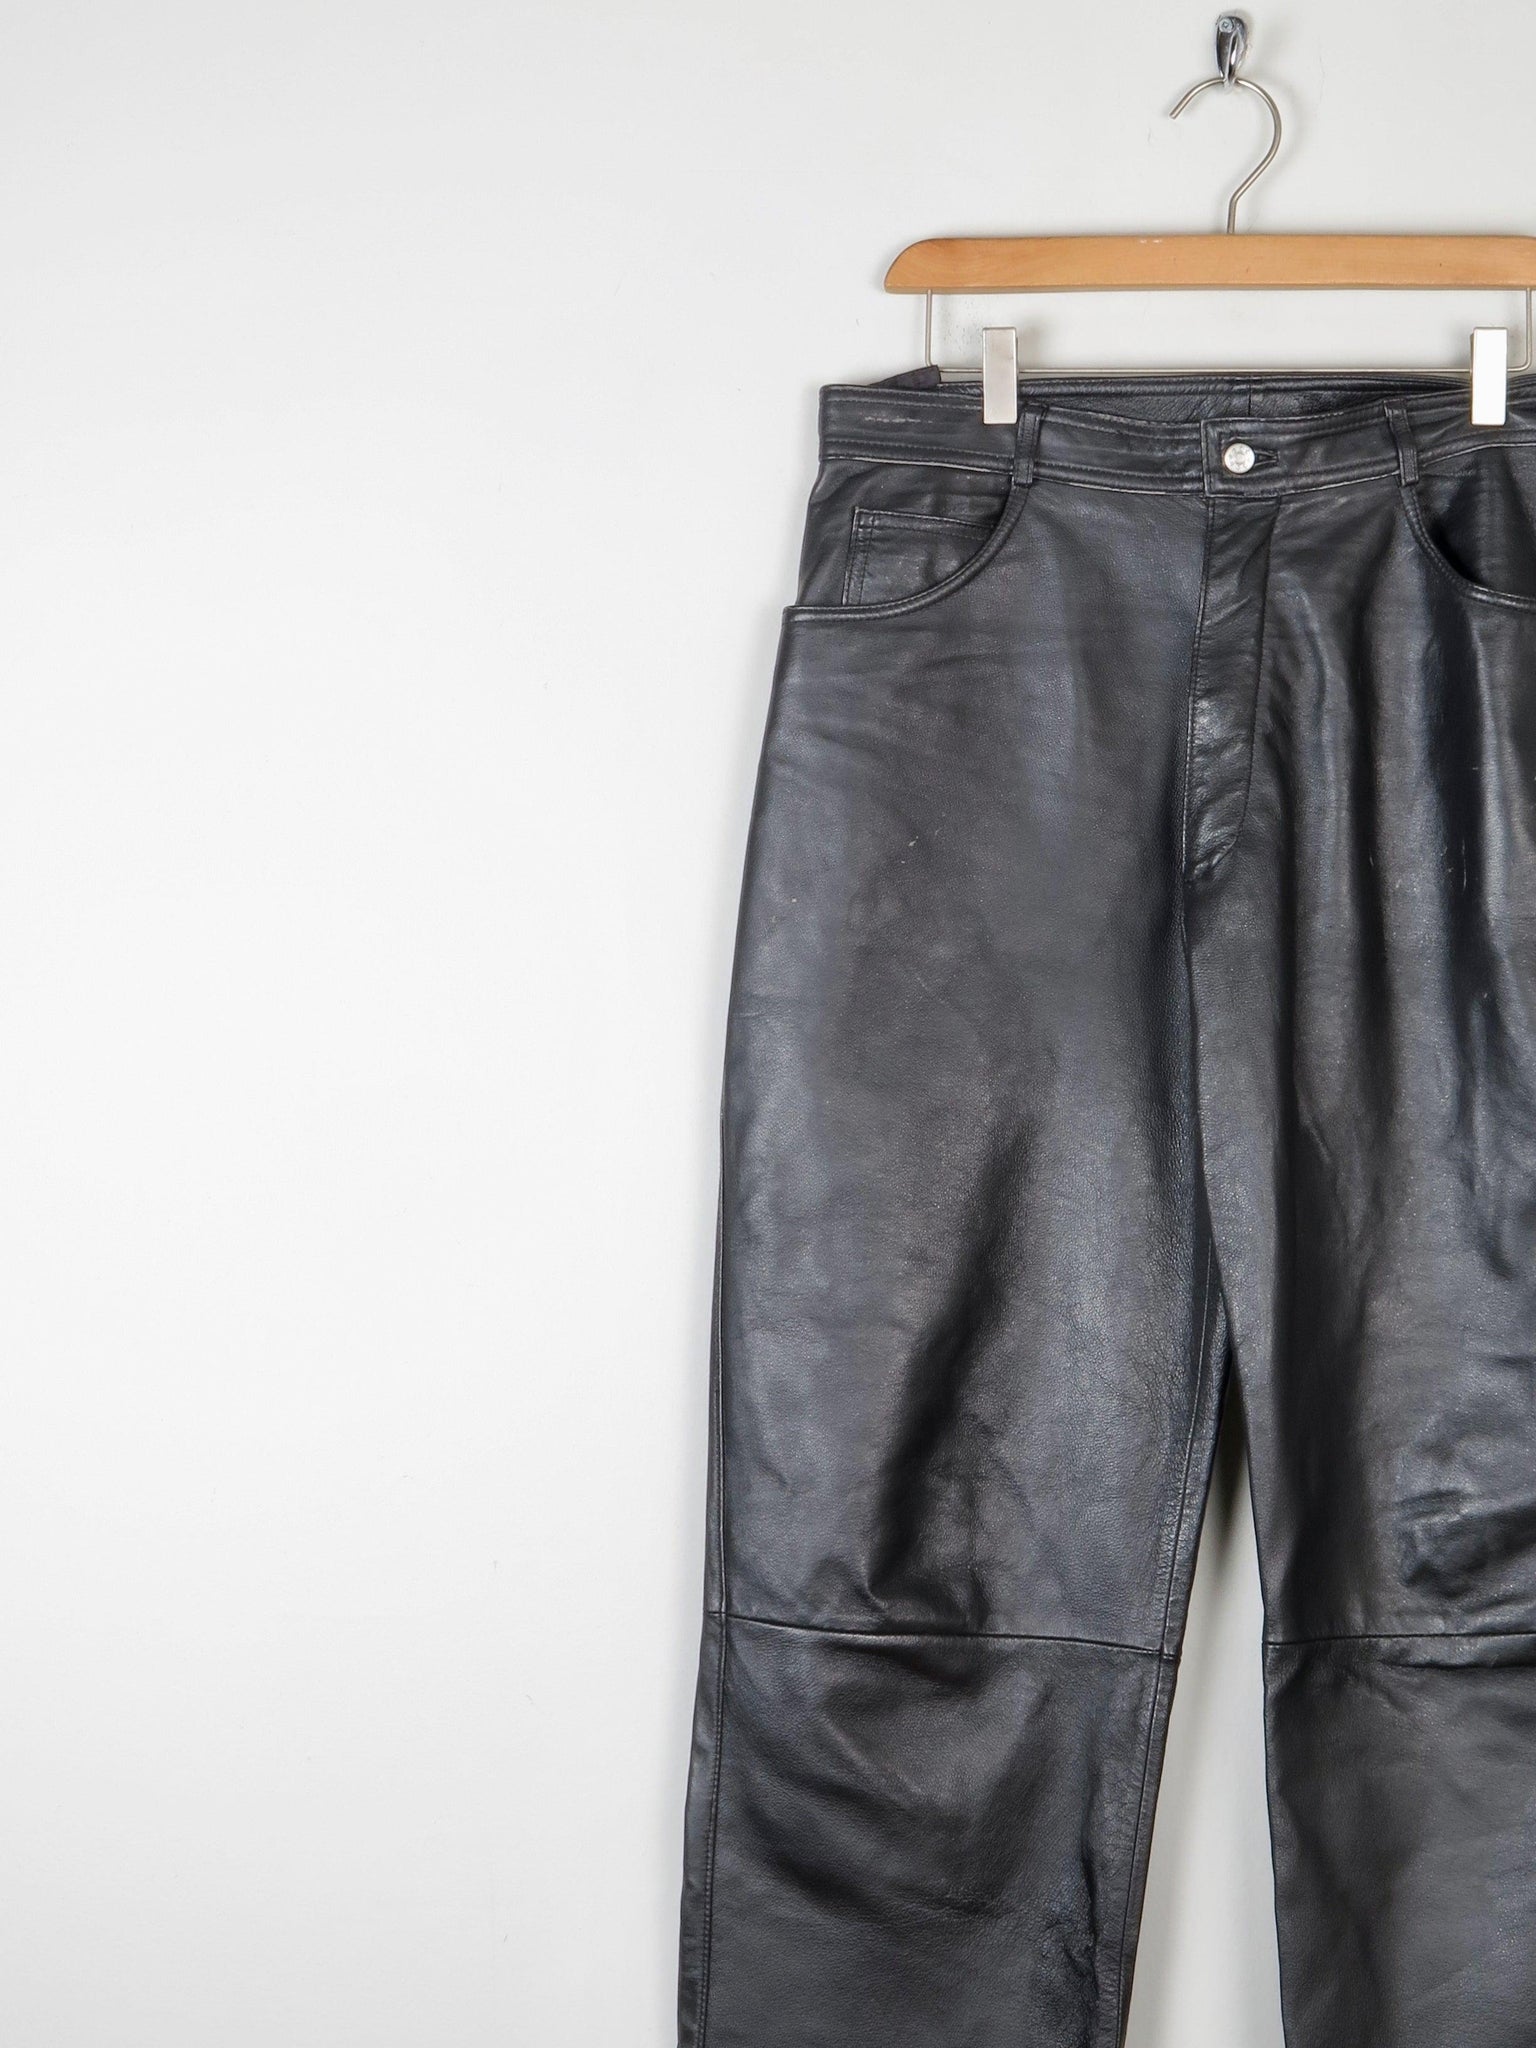 Women’s Black Leather Cropped Trousers 32" - The Harlequin